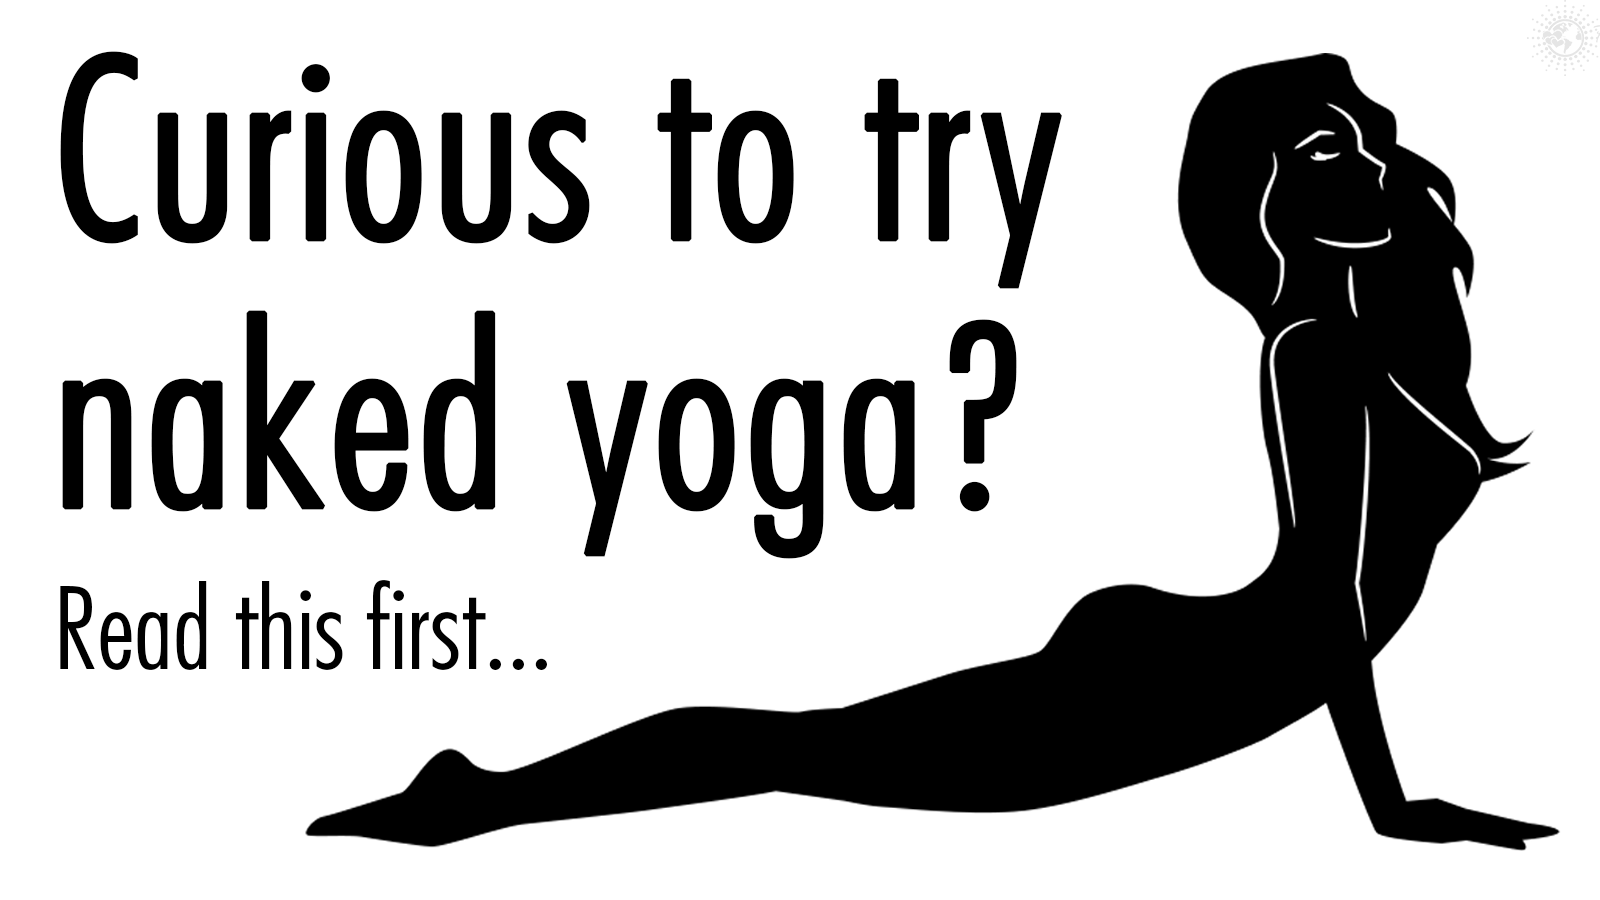 Curious to try naked yoga? Read this first (via Power of Positivity: Positive Thinking & Attitude)